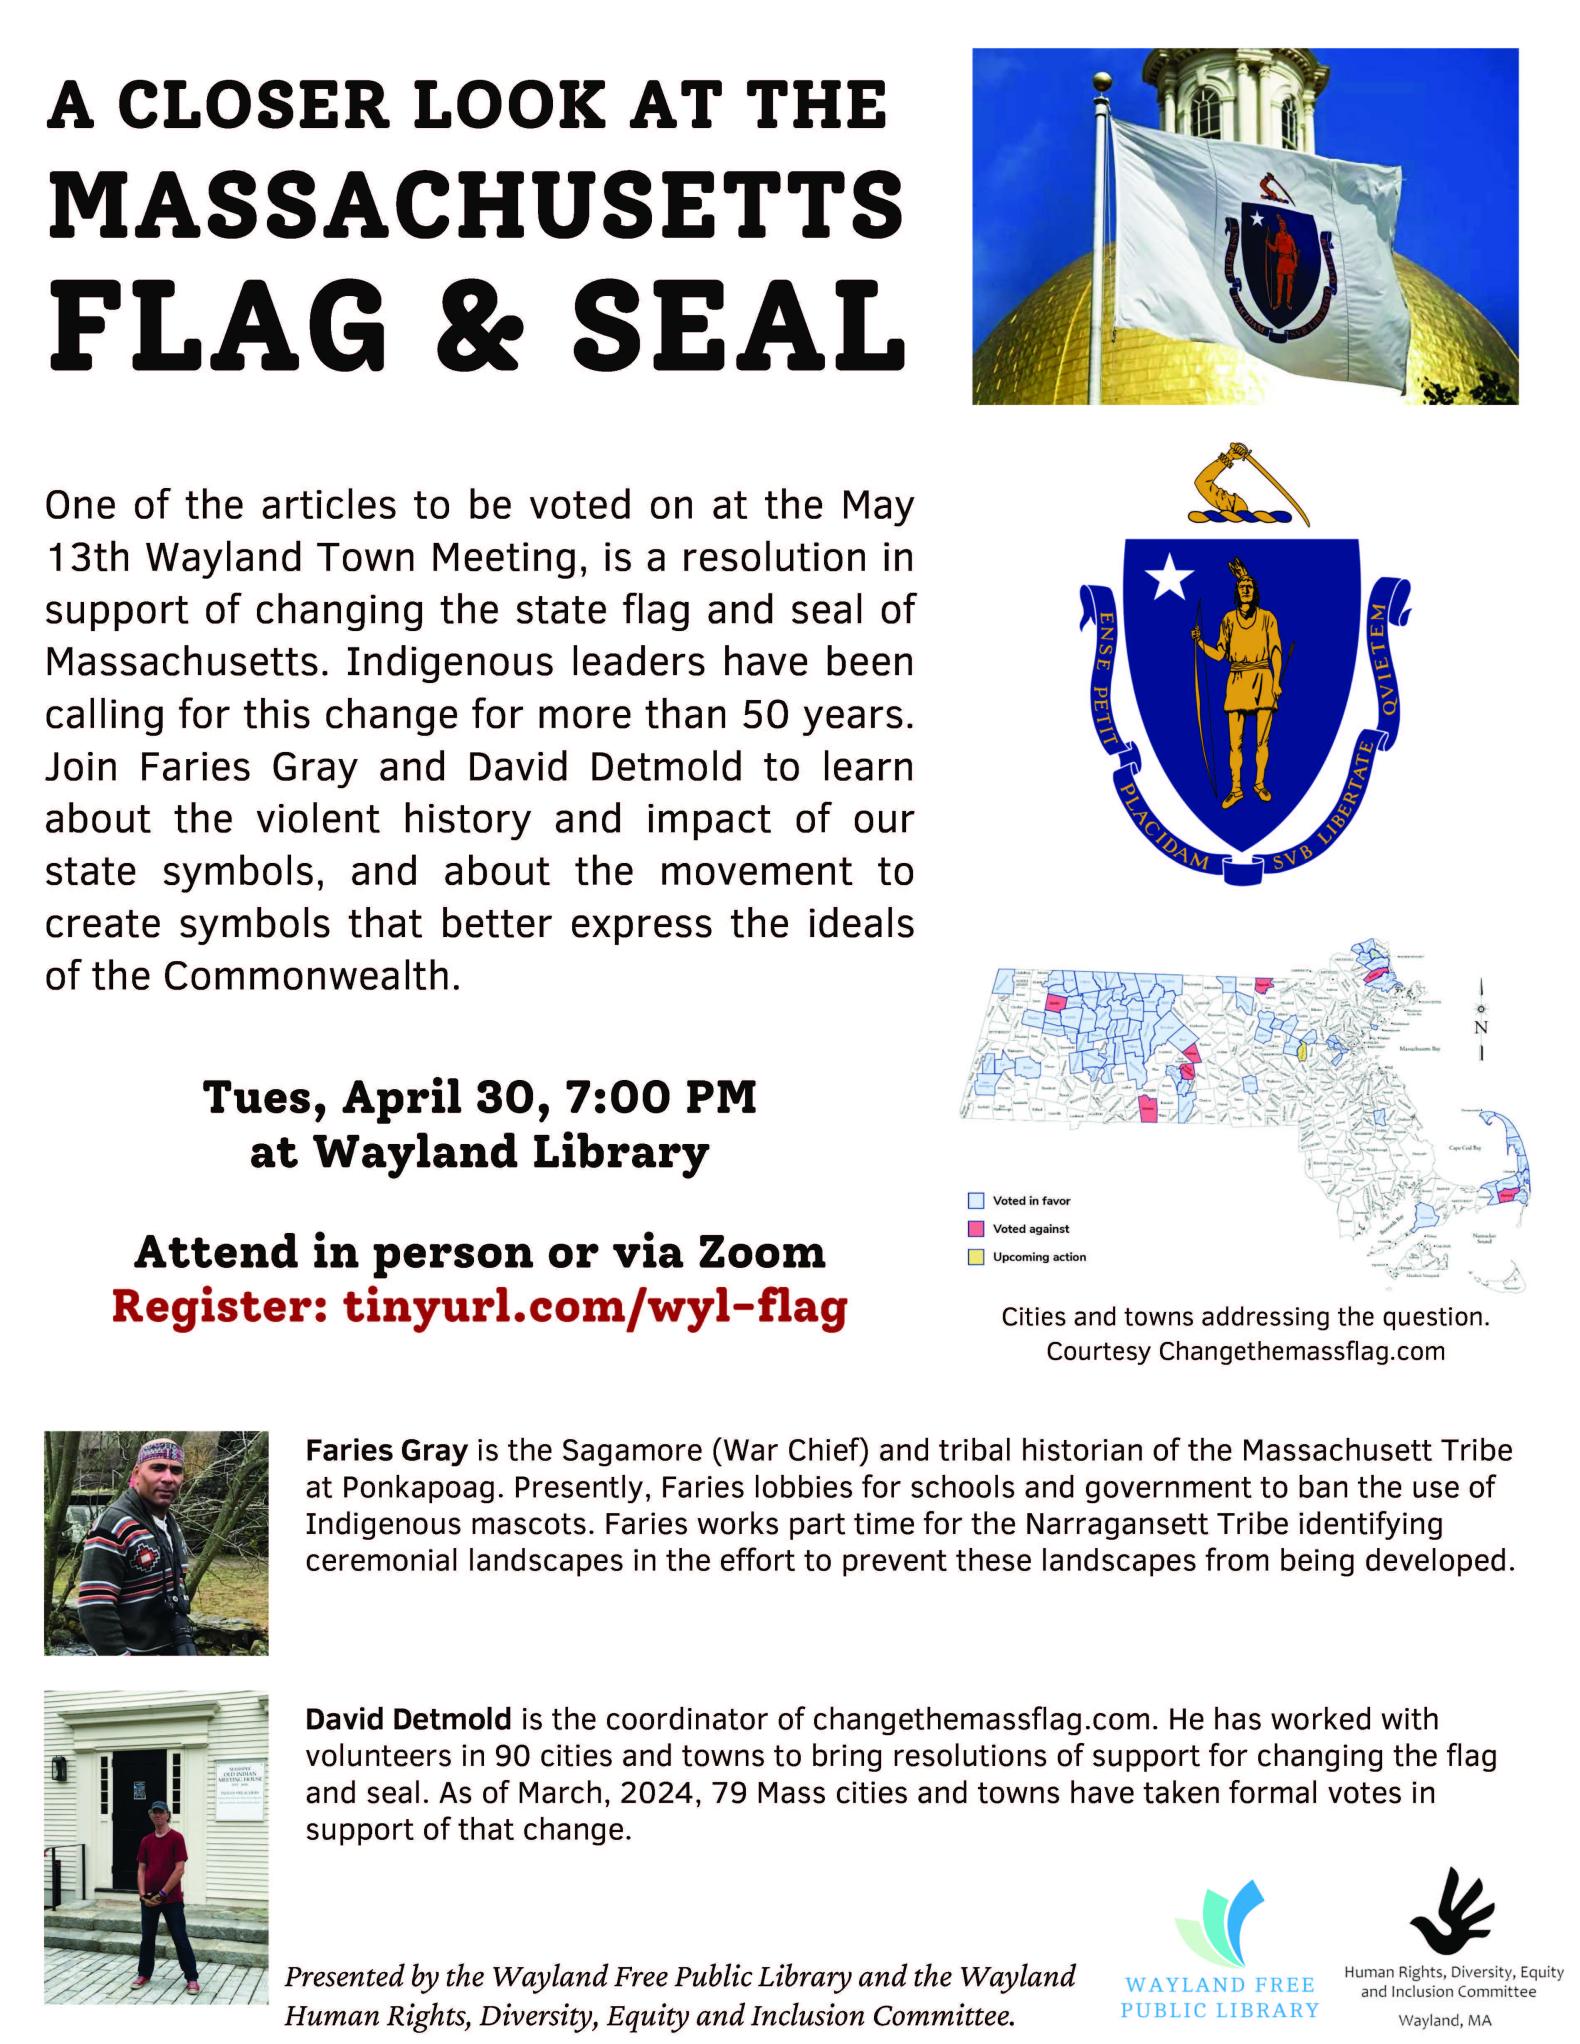 A Closer Look - Flag and Seal